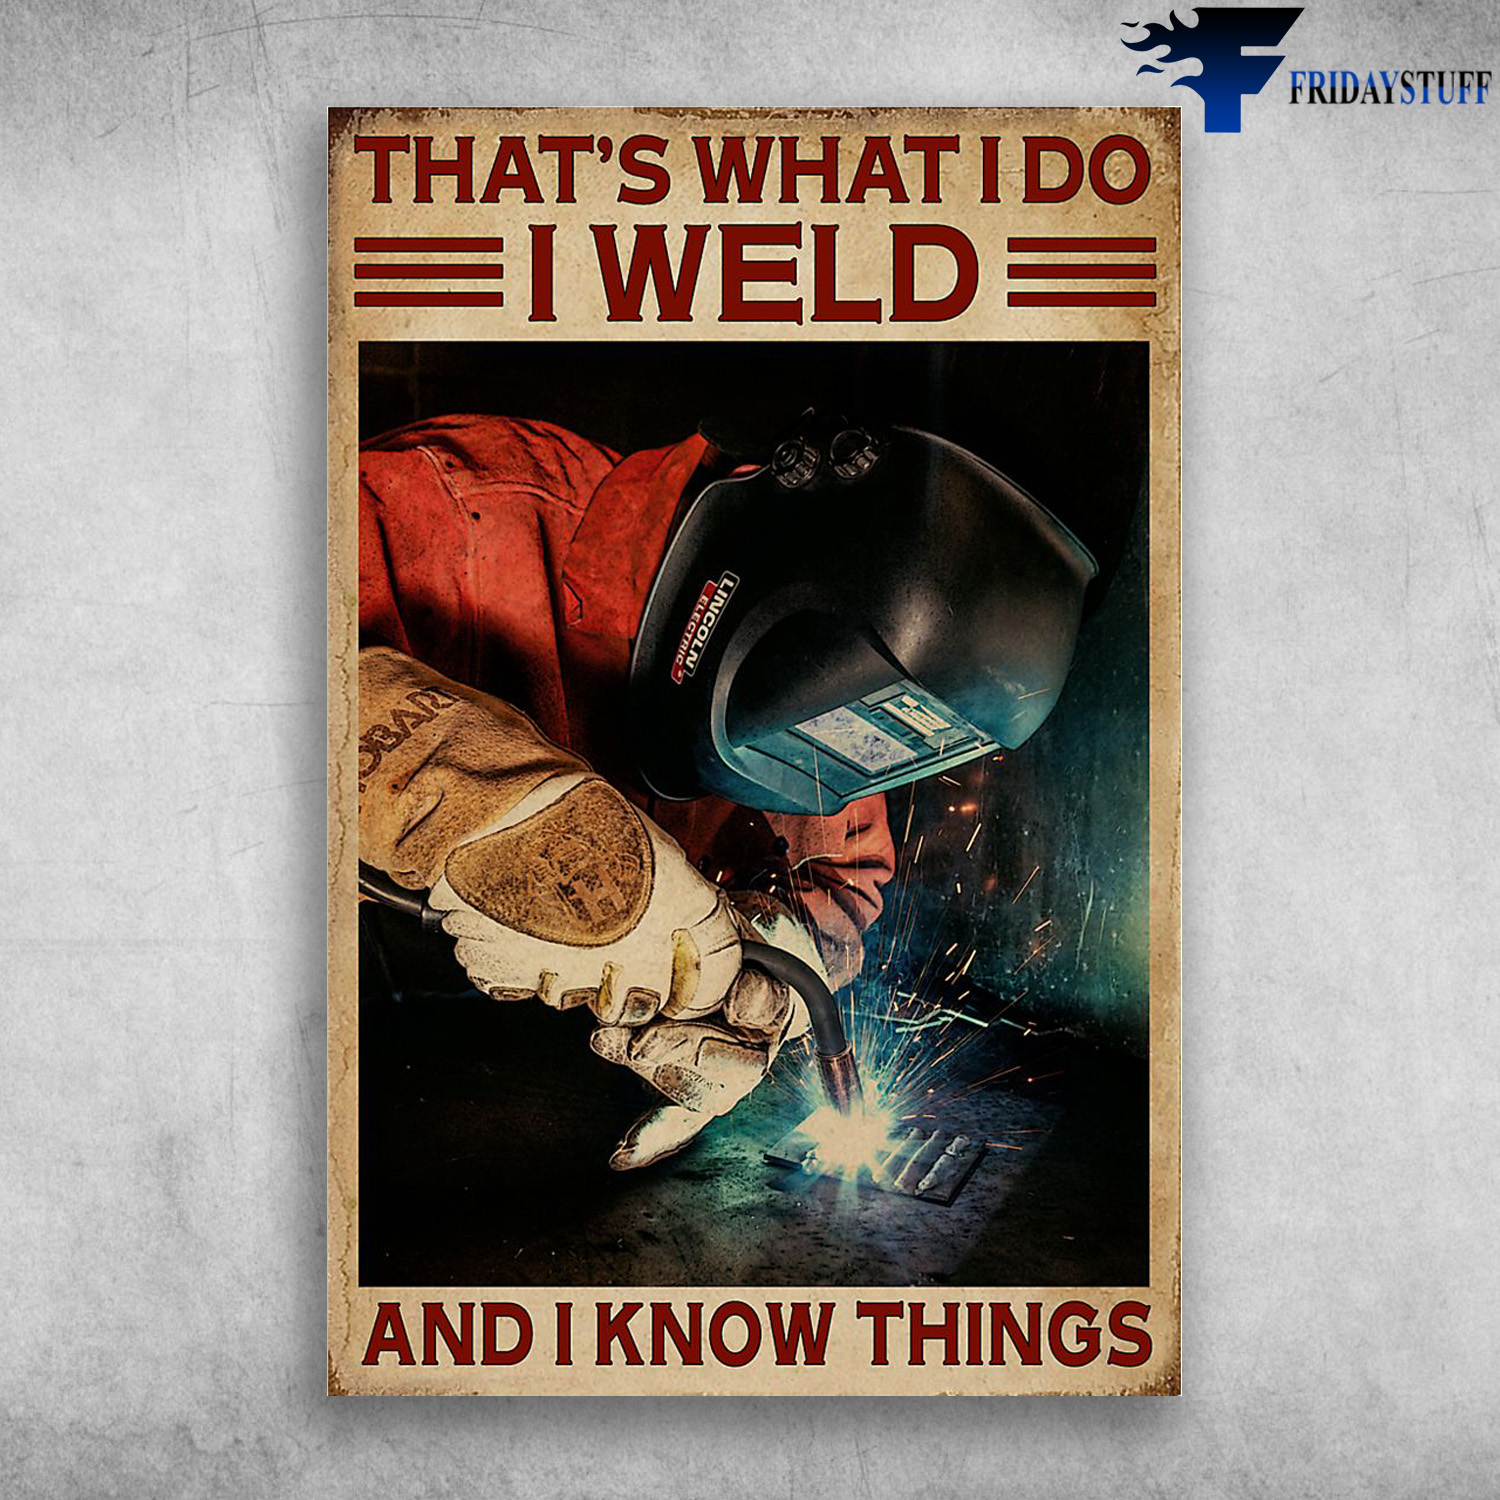 Welder In Work - That's What I Do, I Weld And I Know Things